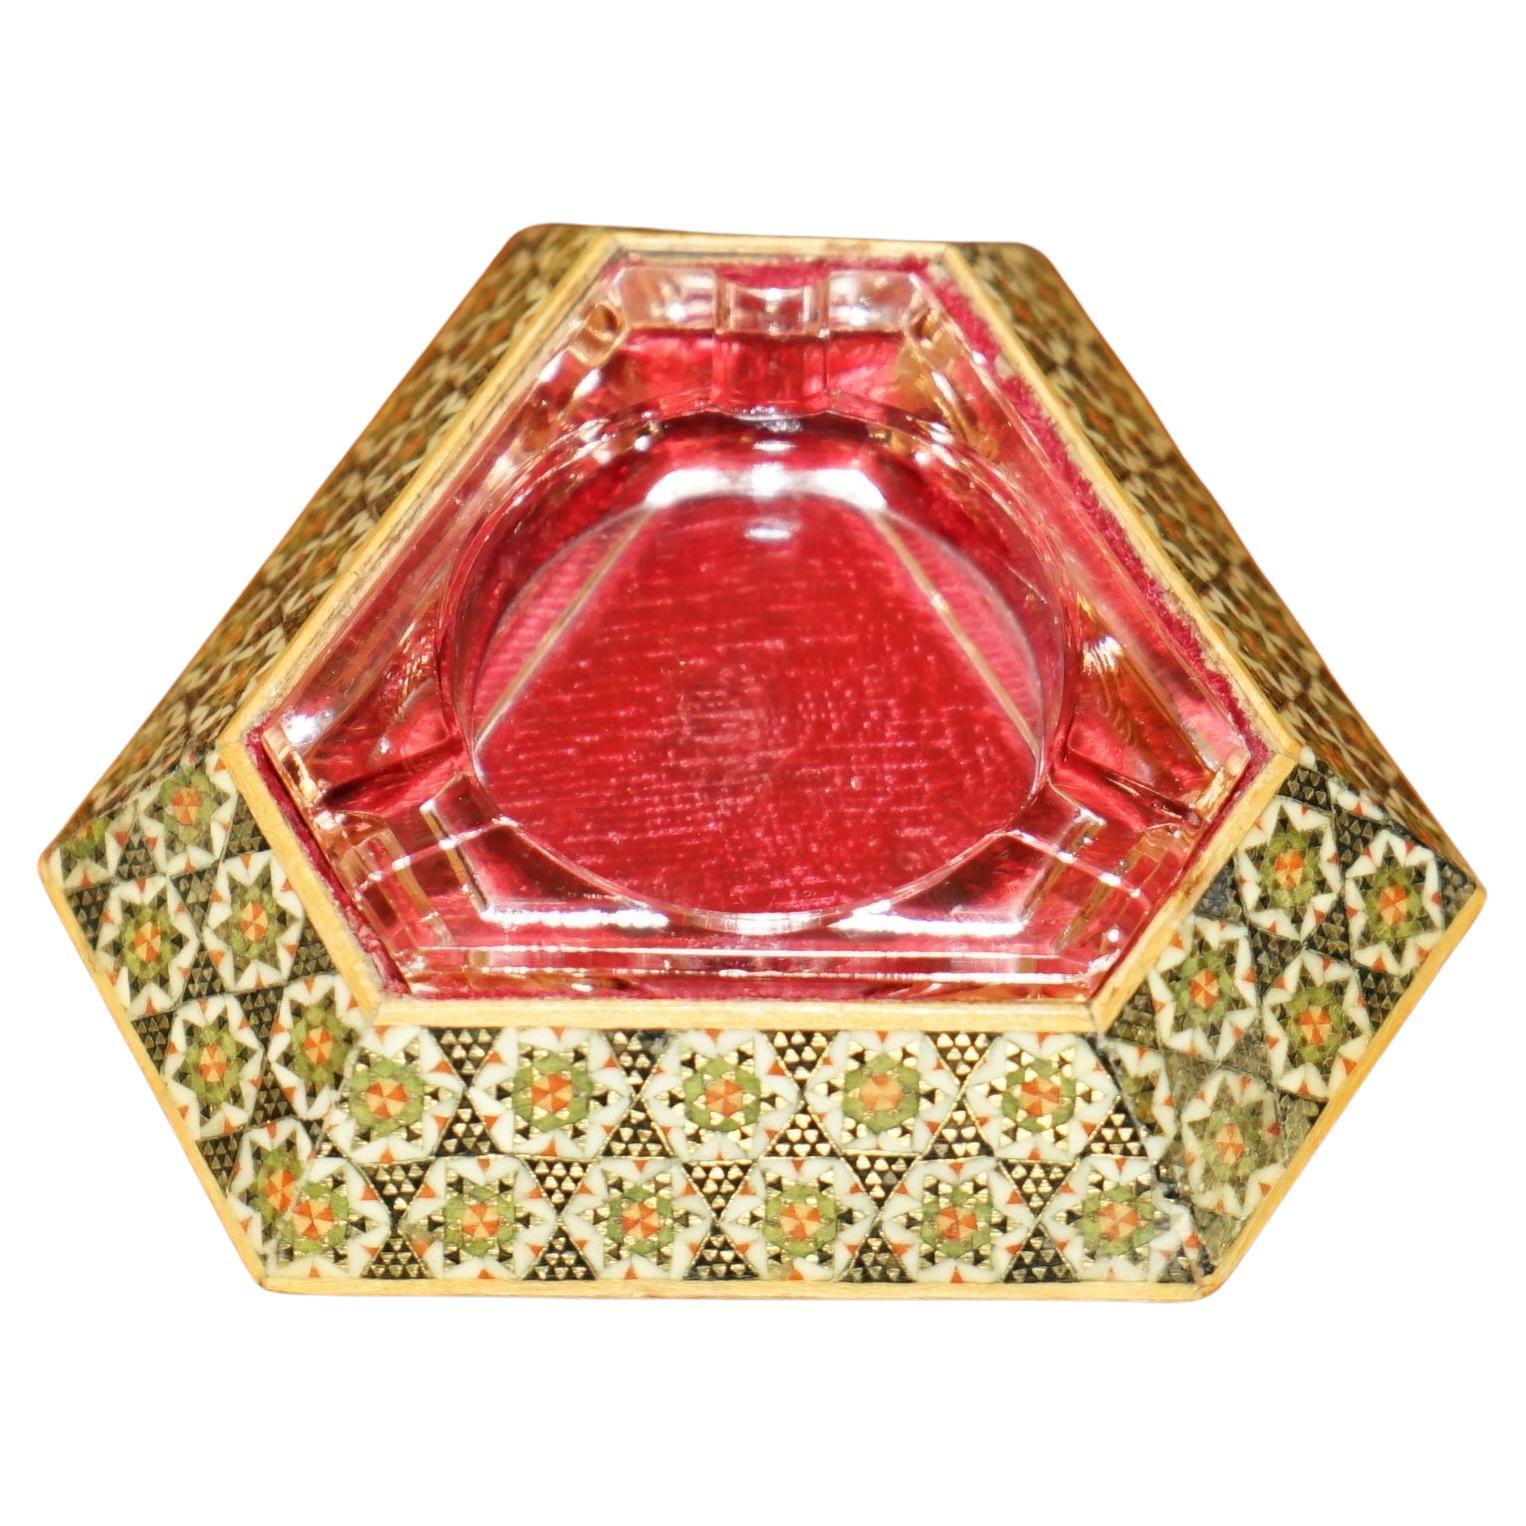 ANTIQUE PERSIAN ASHTRAY WiTH CRANBERRY GLASS TRIANGLE INTERNAL TRAY For Sale